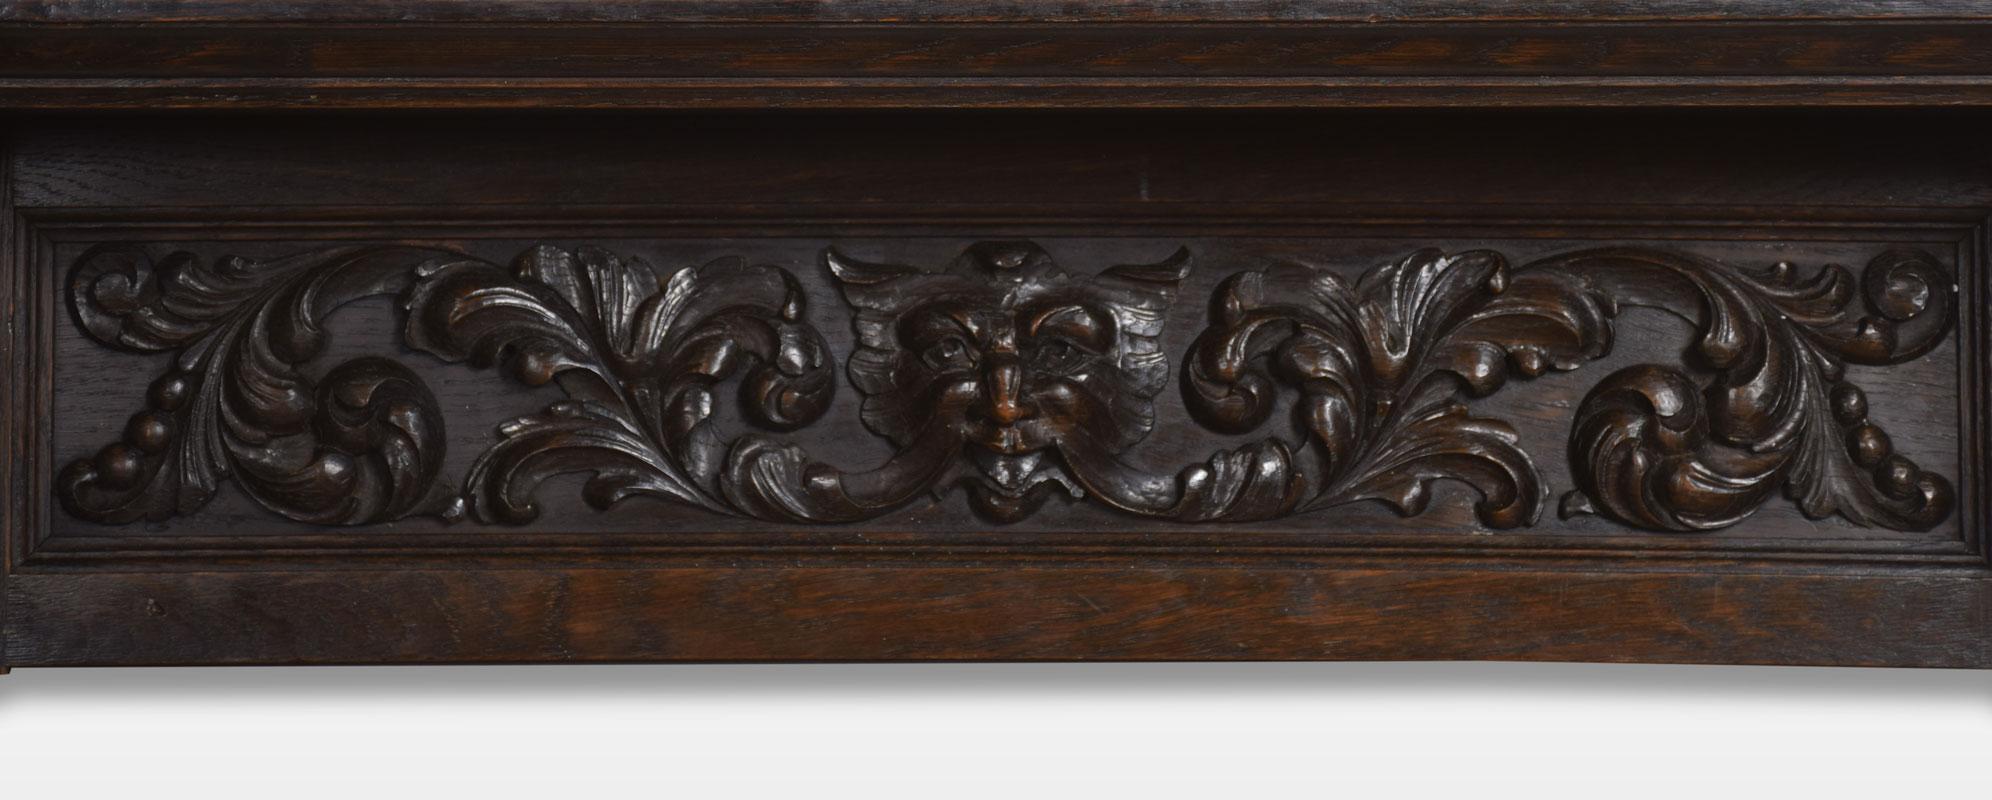 19th century oak wall bracket. The rectangular shelf supported on two stylized ship’s figureheads flanking carved back panel with green man centre.
Dimensions:
Height 11 inches
Width 36.5 inches
Depth 8 inches.